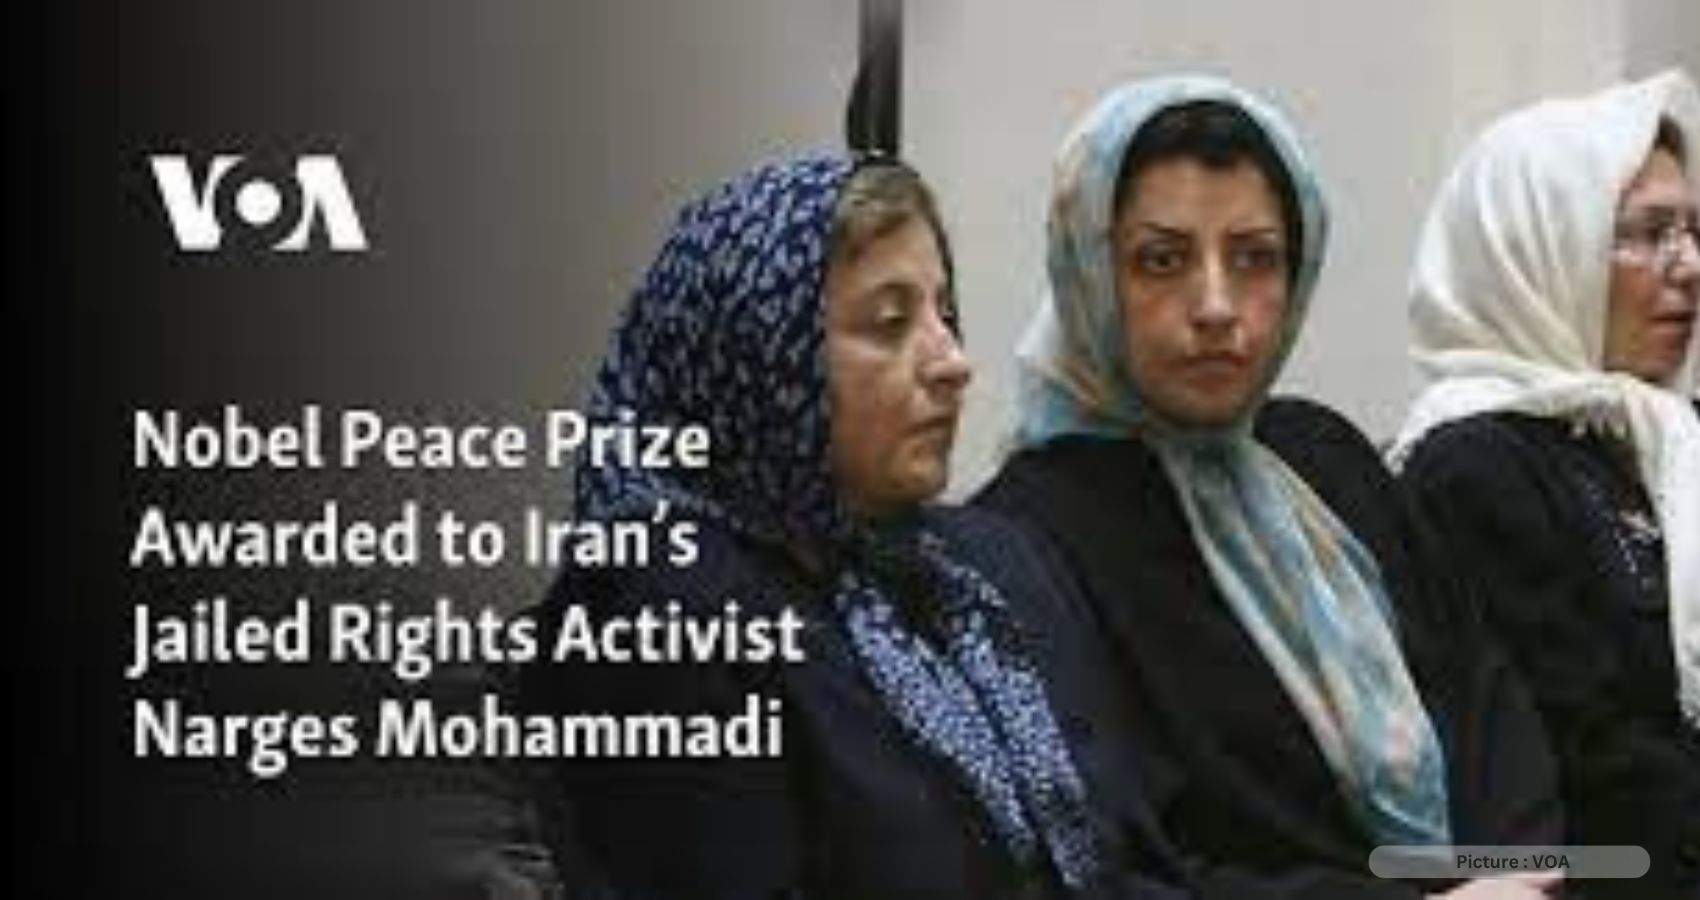 Narges Mohammadi, Iranian Rights Activist Receives Nobel Peace Prize